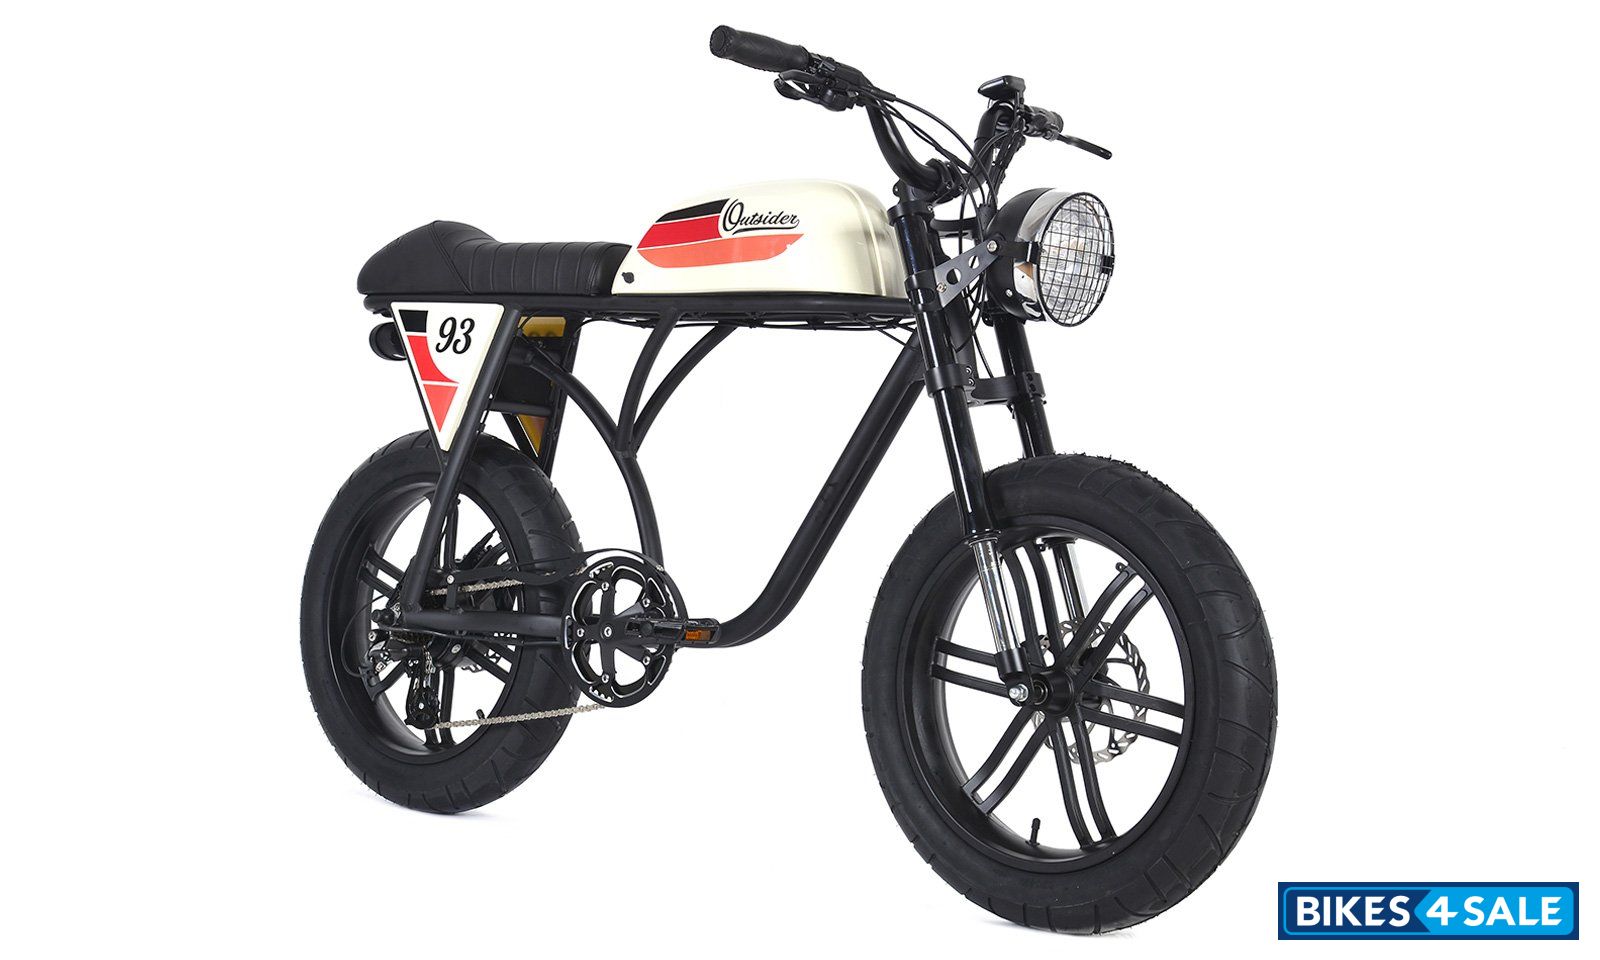 CityCoco Outsider Scooter: Price, Specs and Features - Bikes4Sale